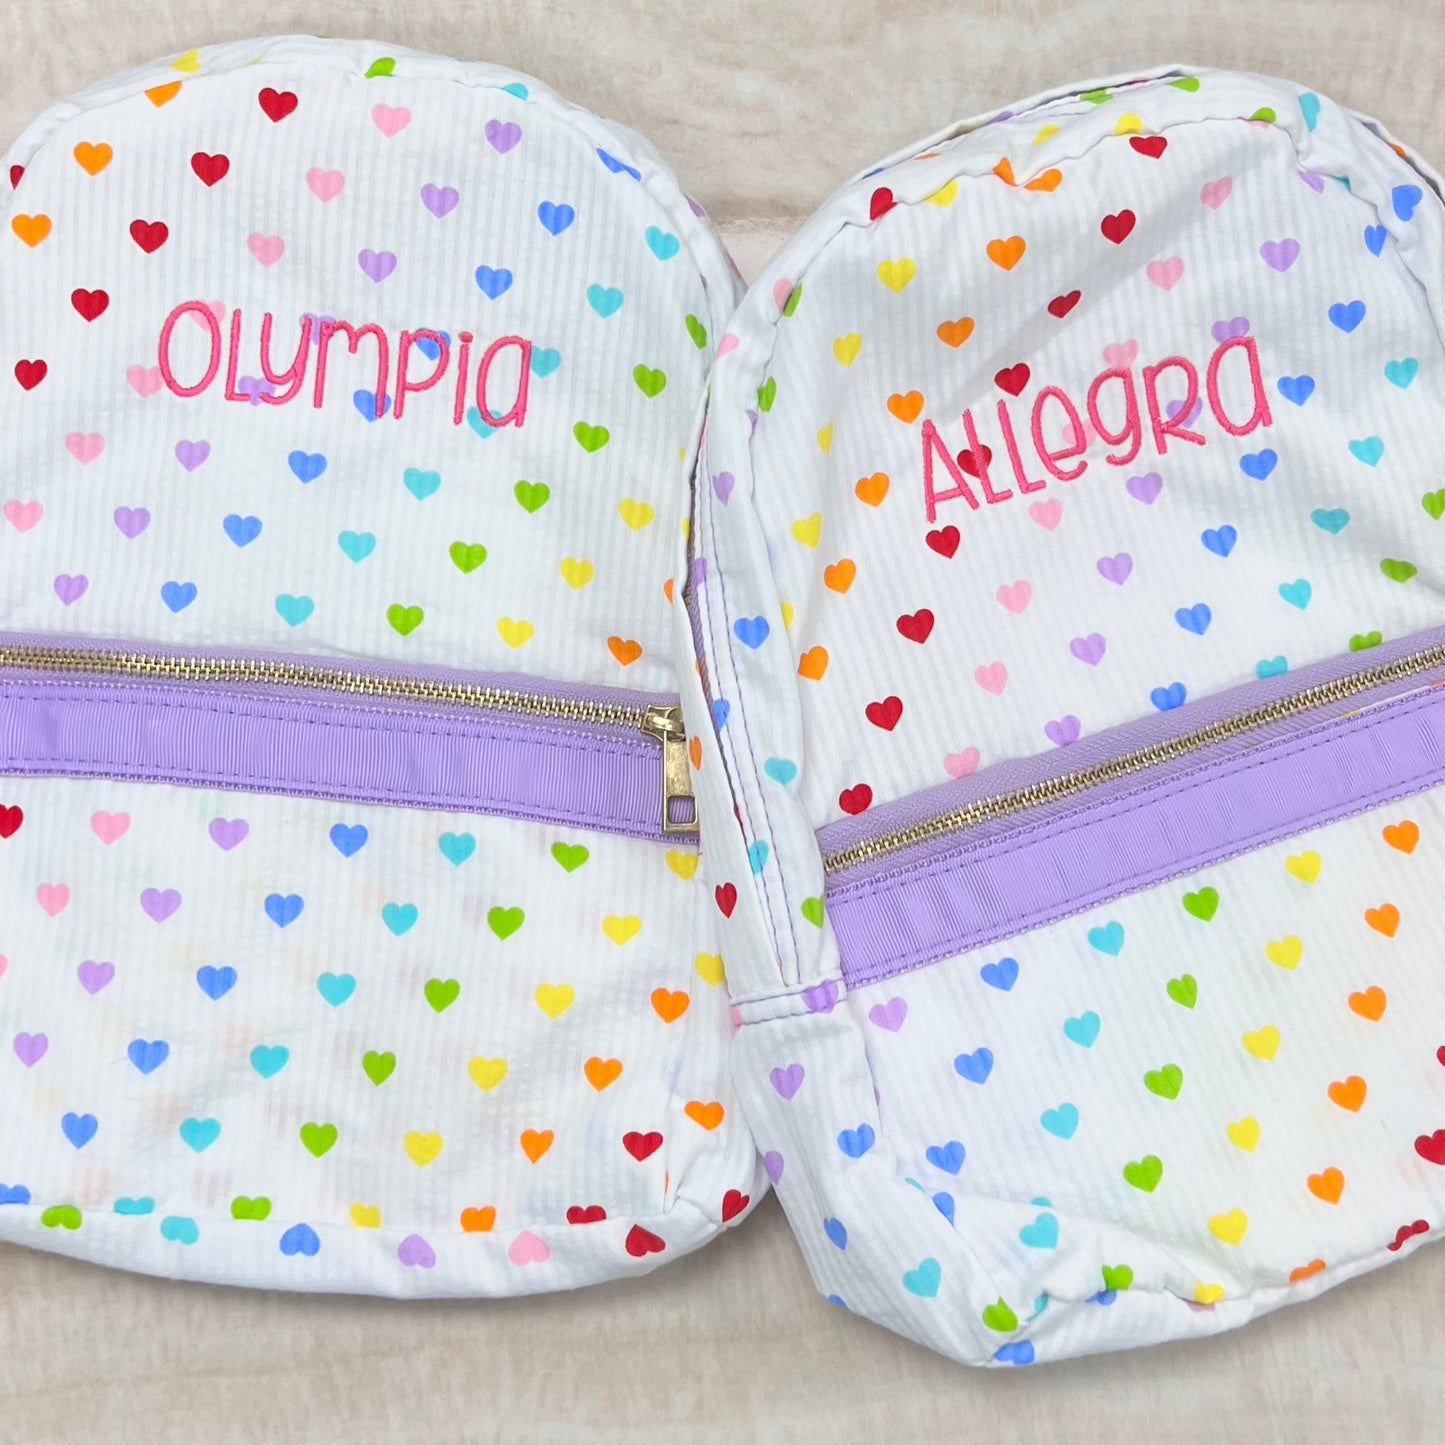 Personalized Seersucker Tiny Hearts Large Backpack - Give Wink